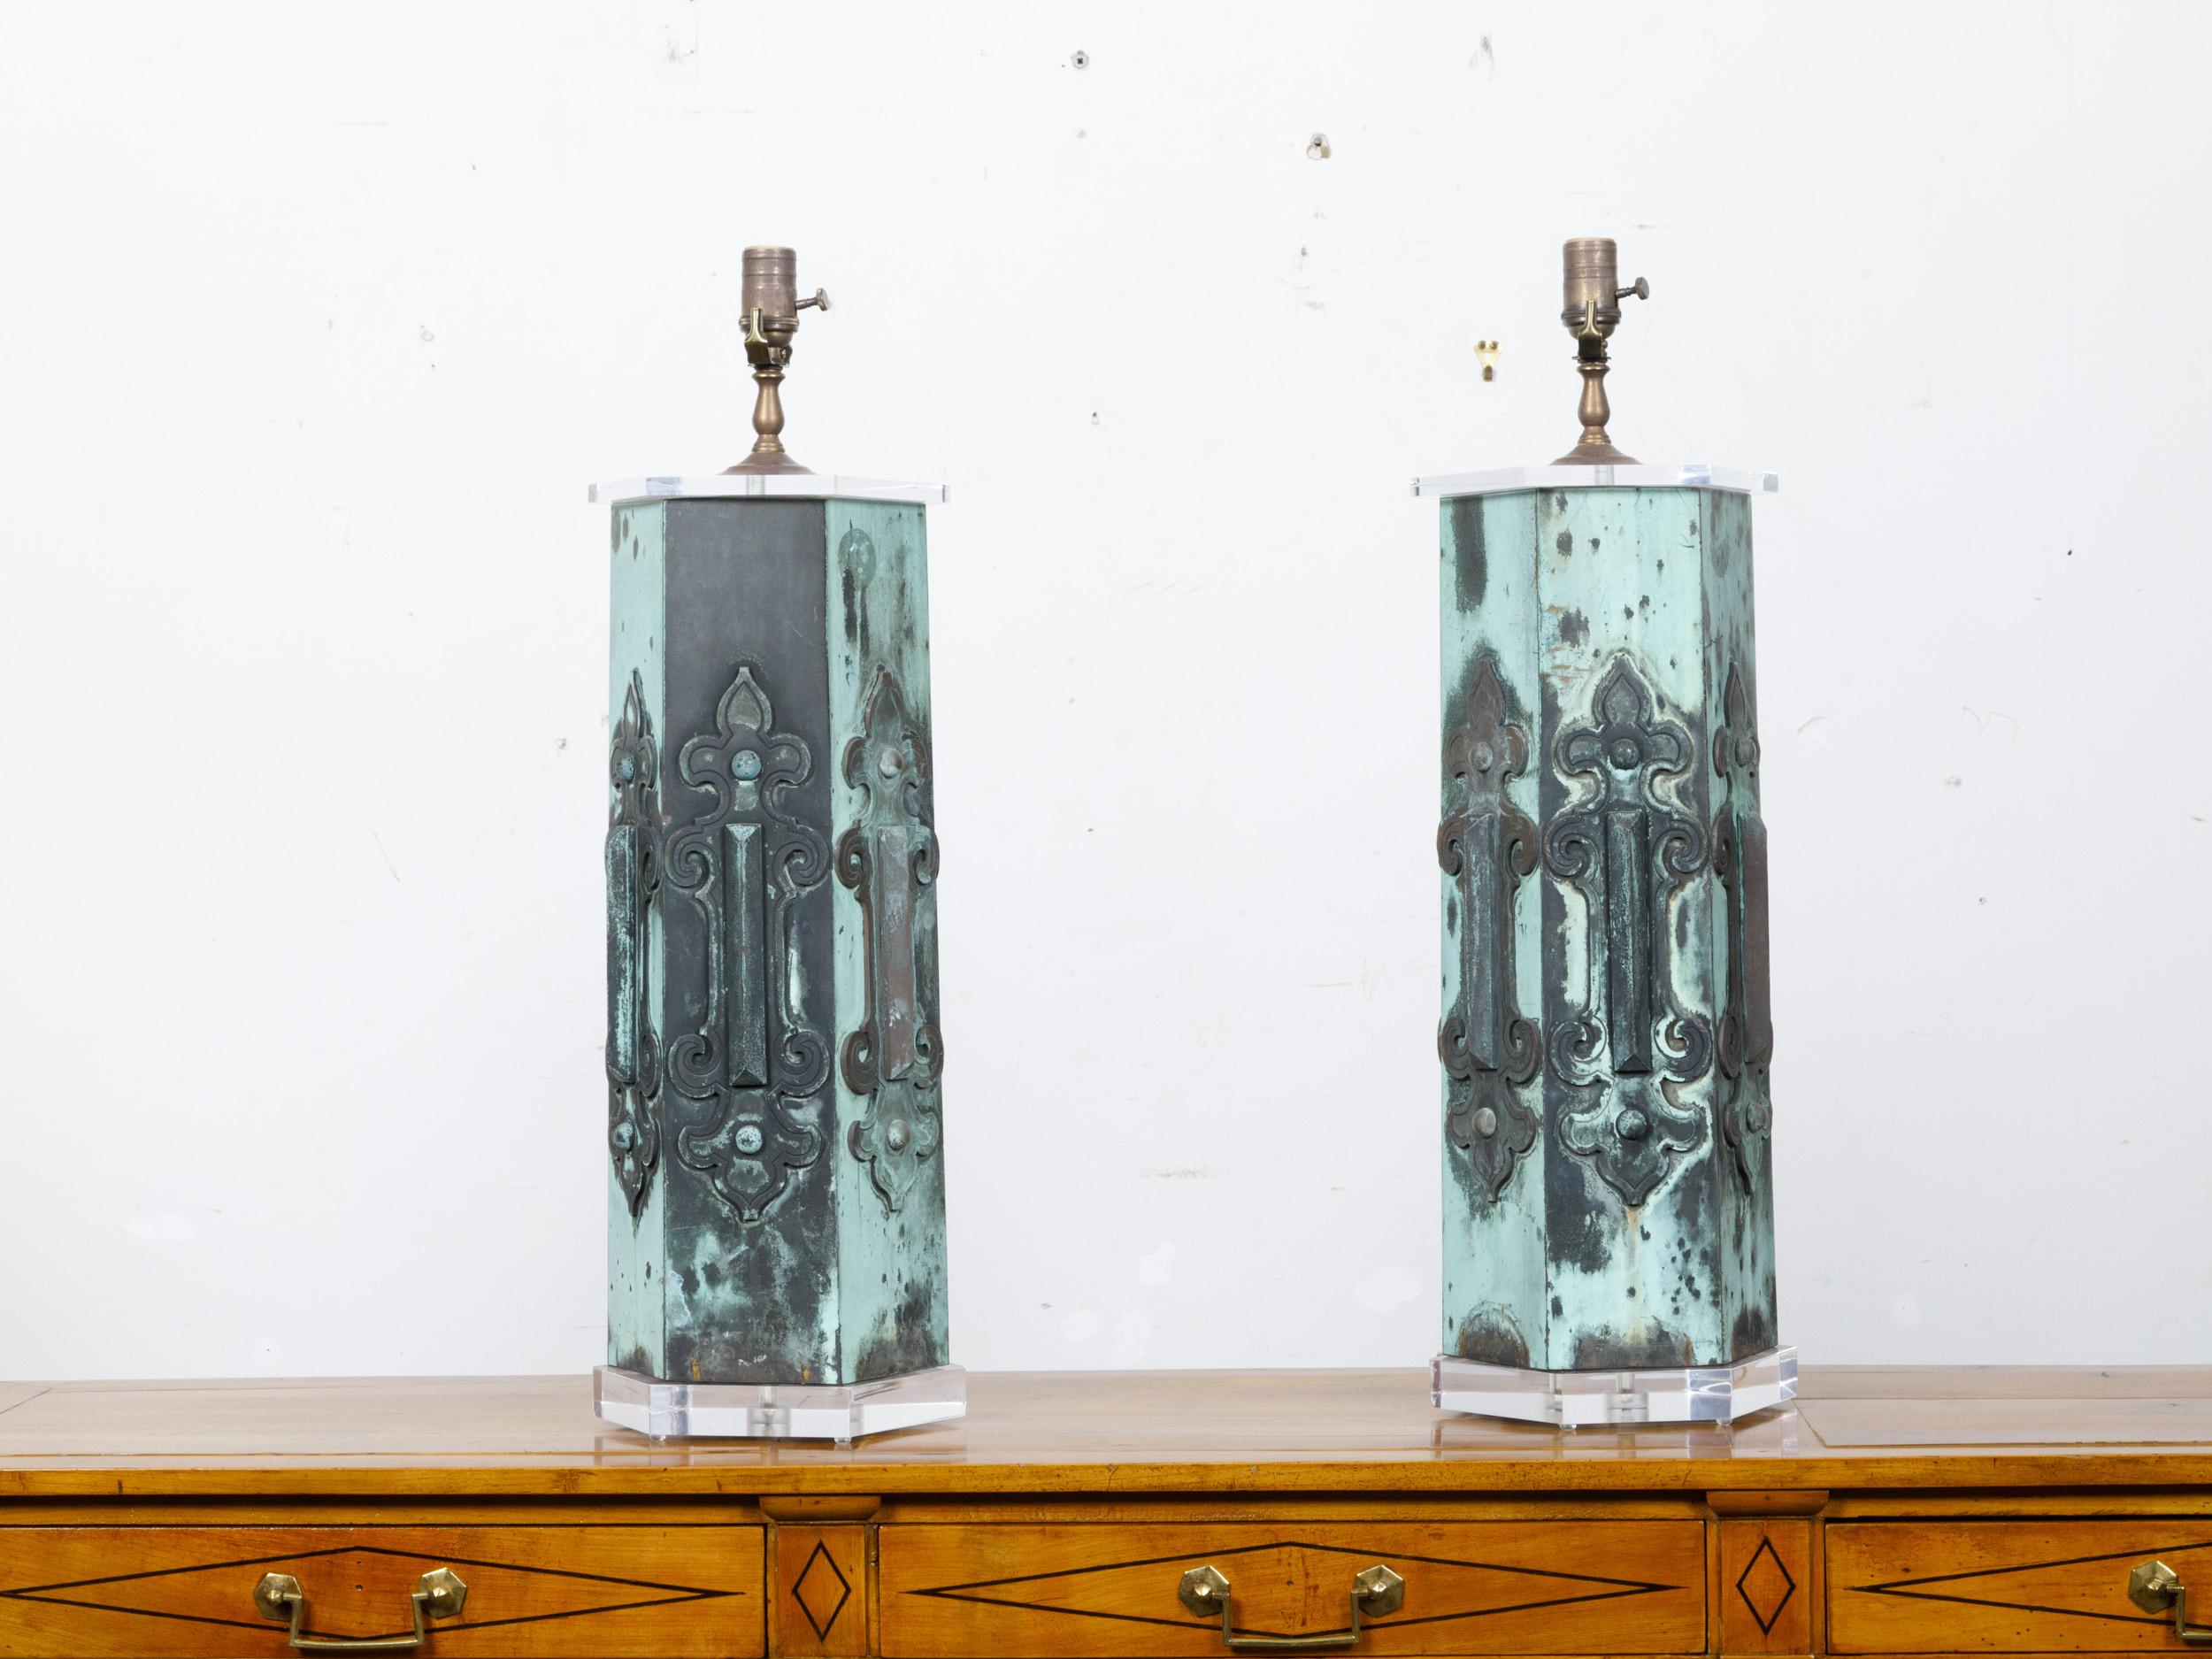 A pair of French hexagonal copper architectural elements from the 19th century with verdigris patina, made into table lamps on lucite bases, wired for the USA. This distinctive pair of table lamps combines the rustic elegance of 19th-century French